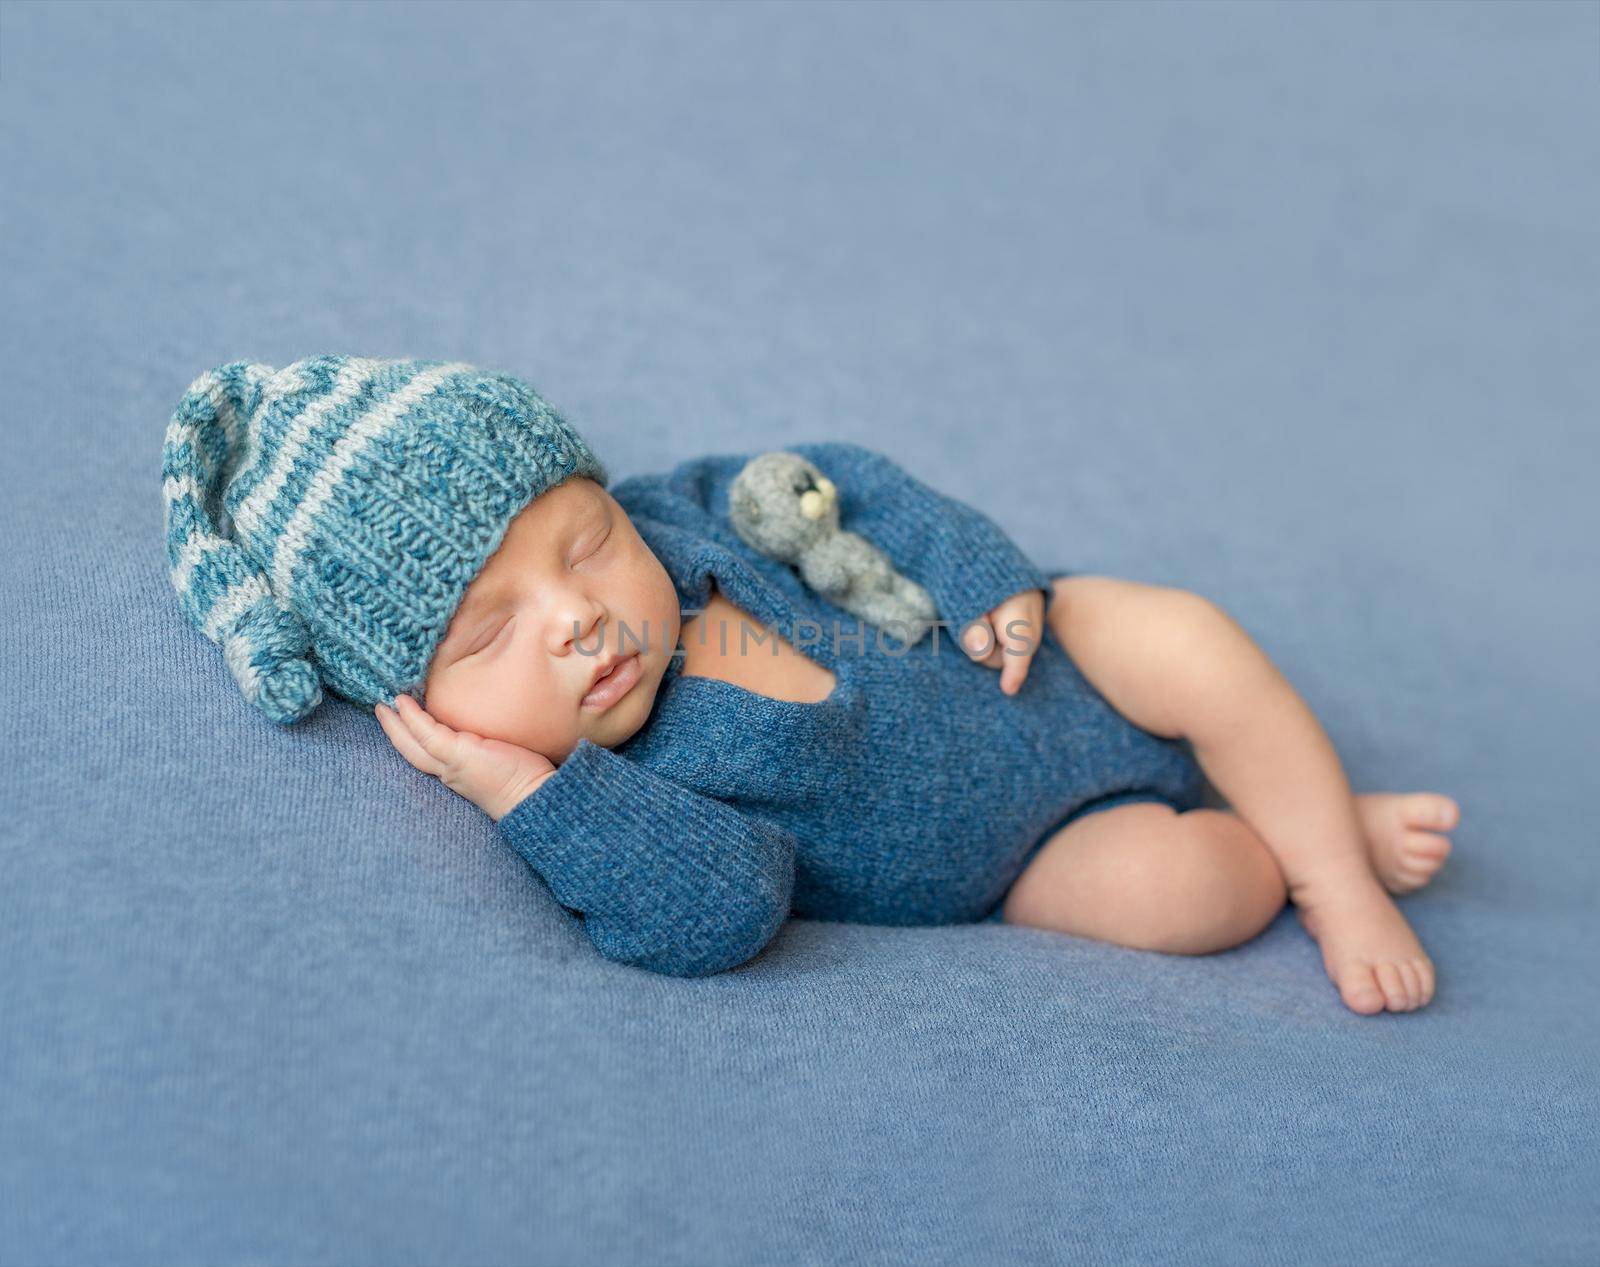 sleeping newborn baby in blue knitted jumpsuit and hat with crossed legs